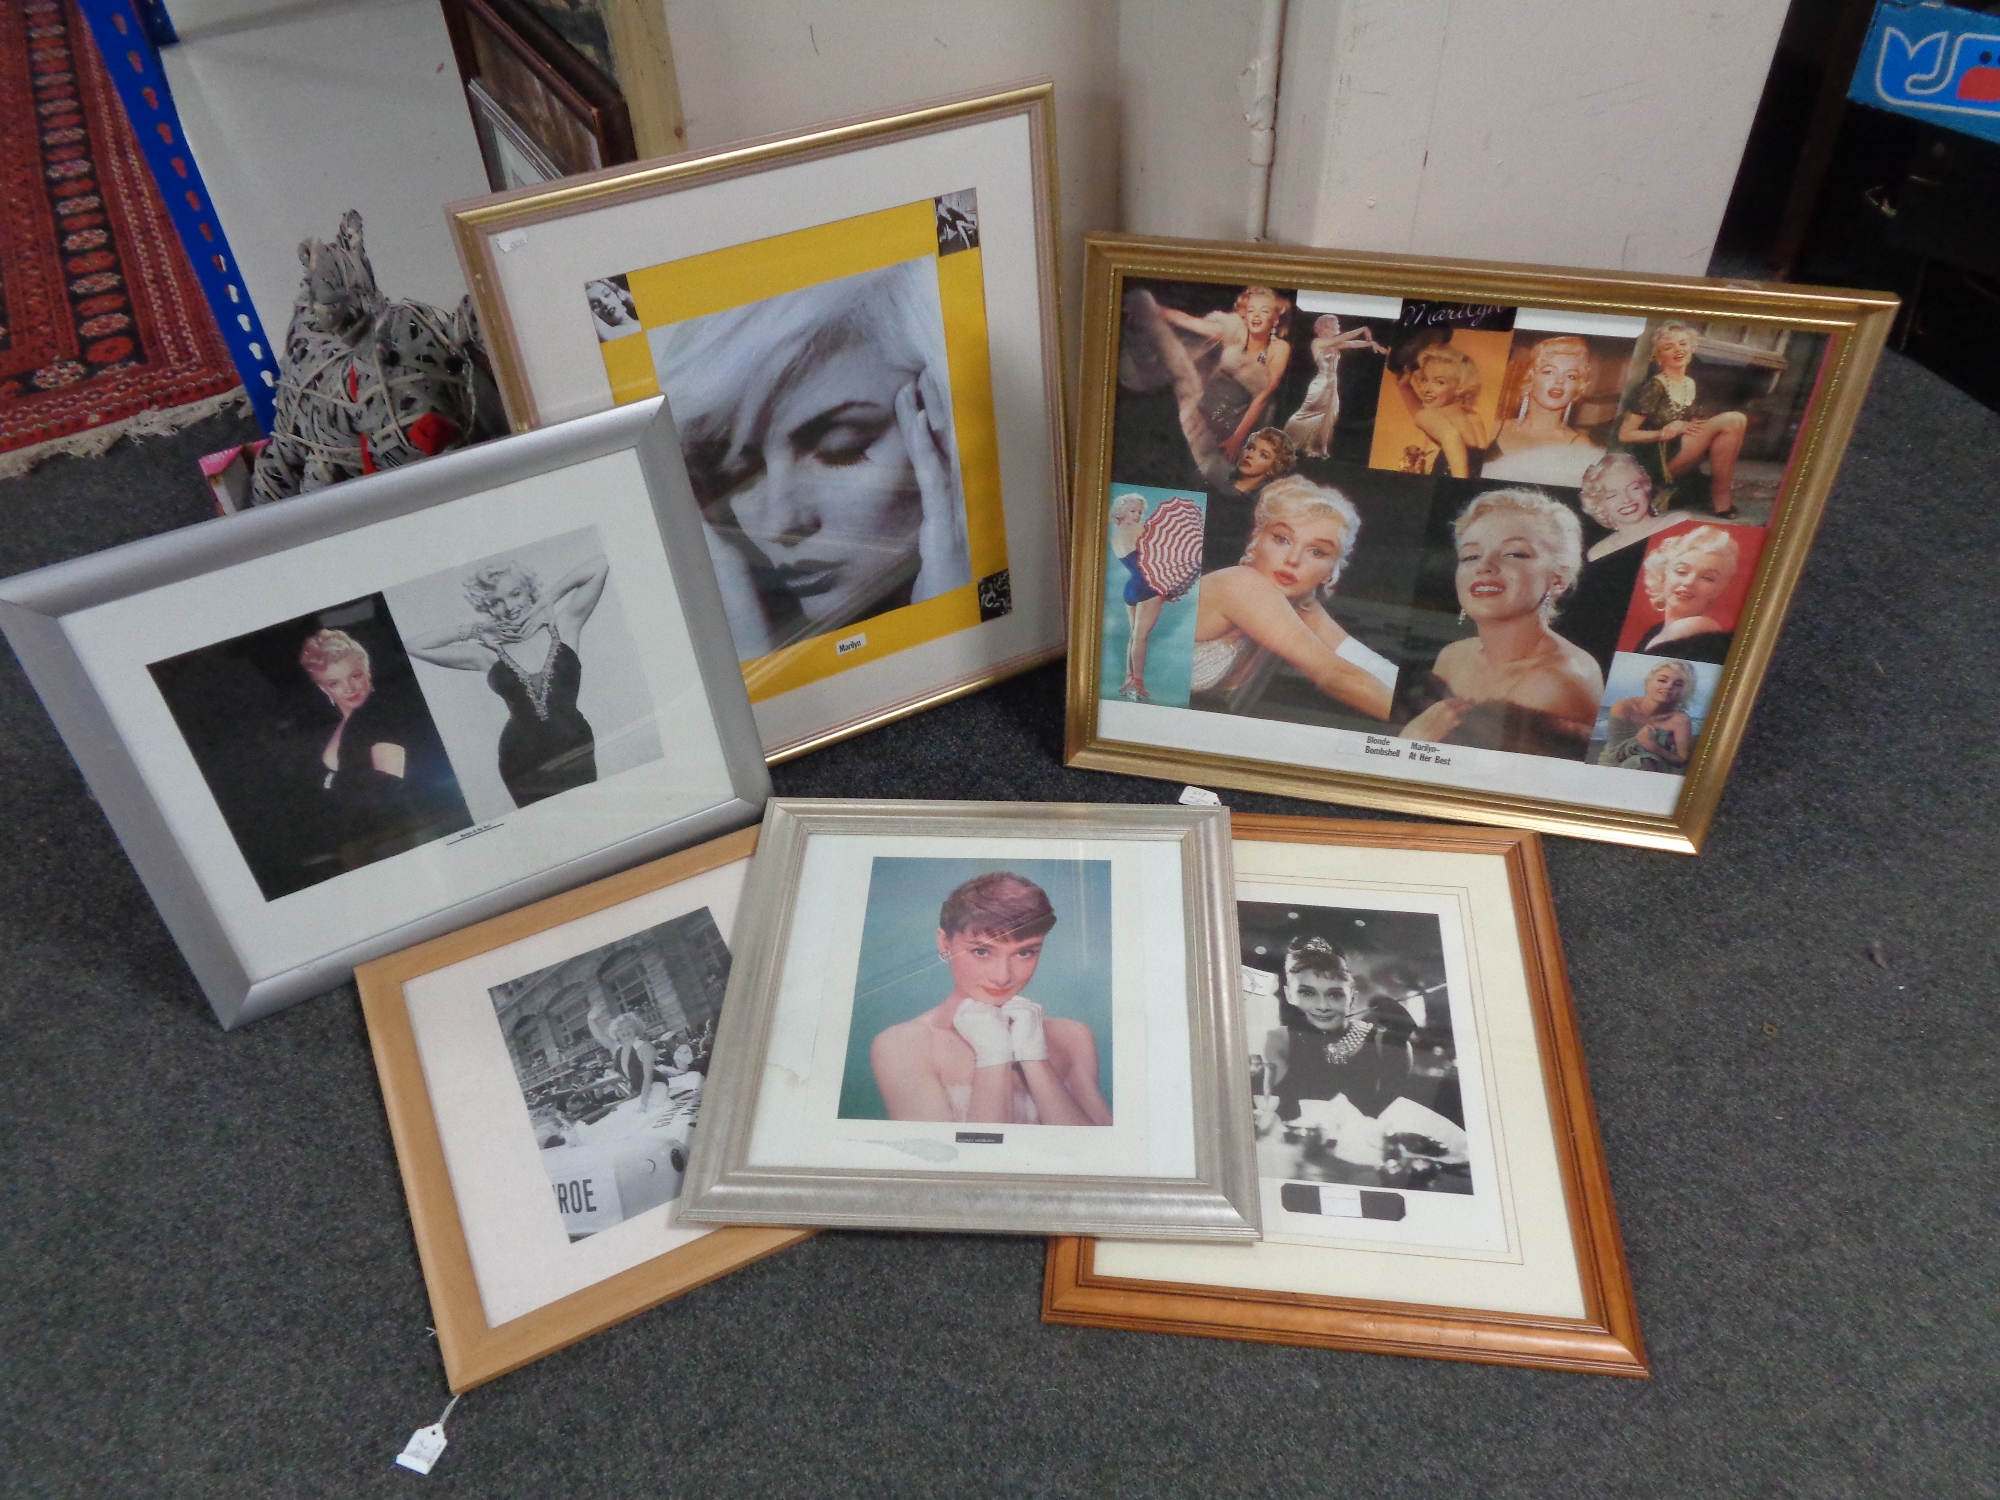 Six framed of Marilyn Monroe and Audrey Hepburn pictures